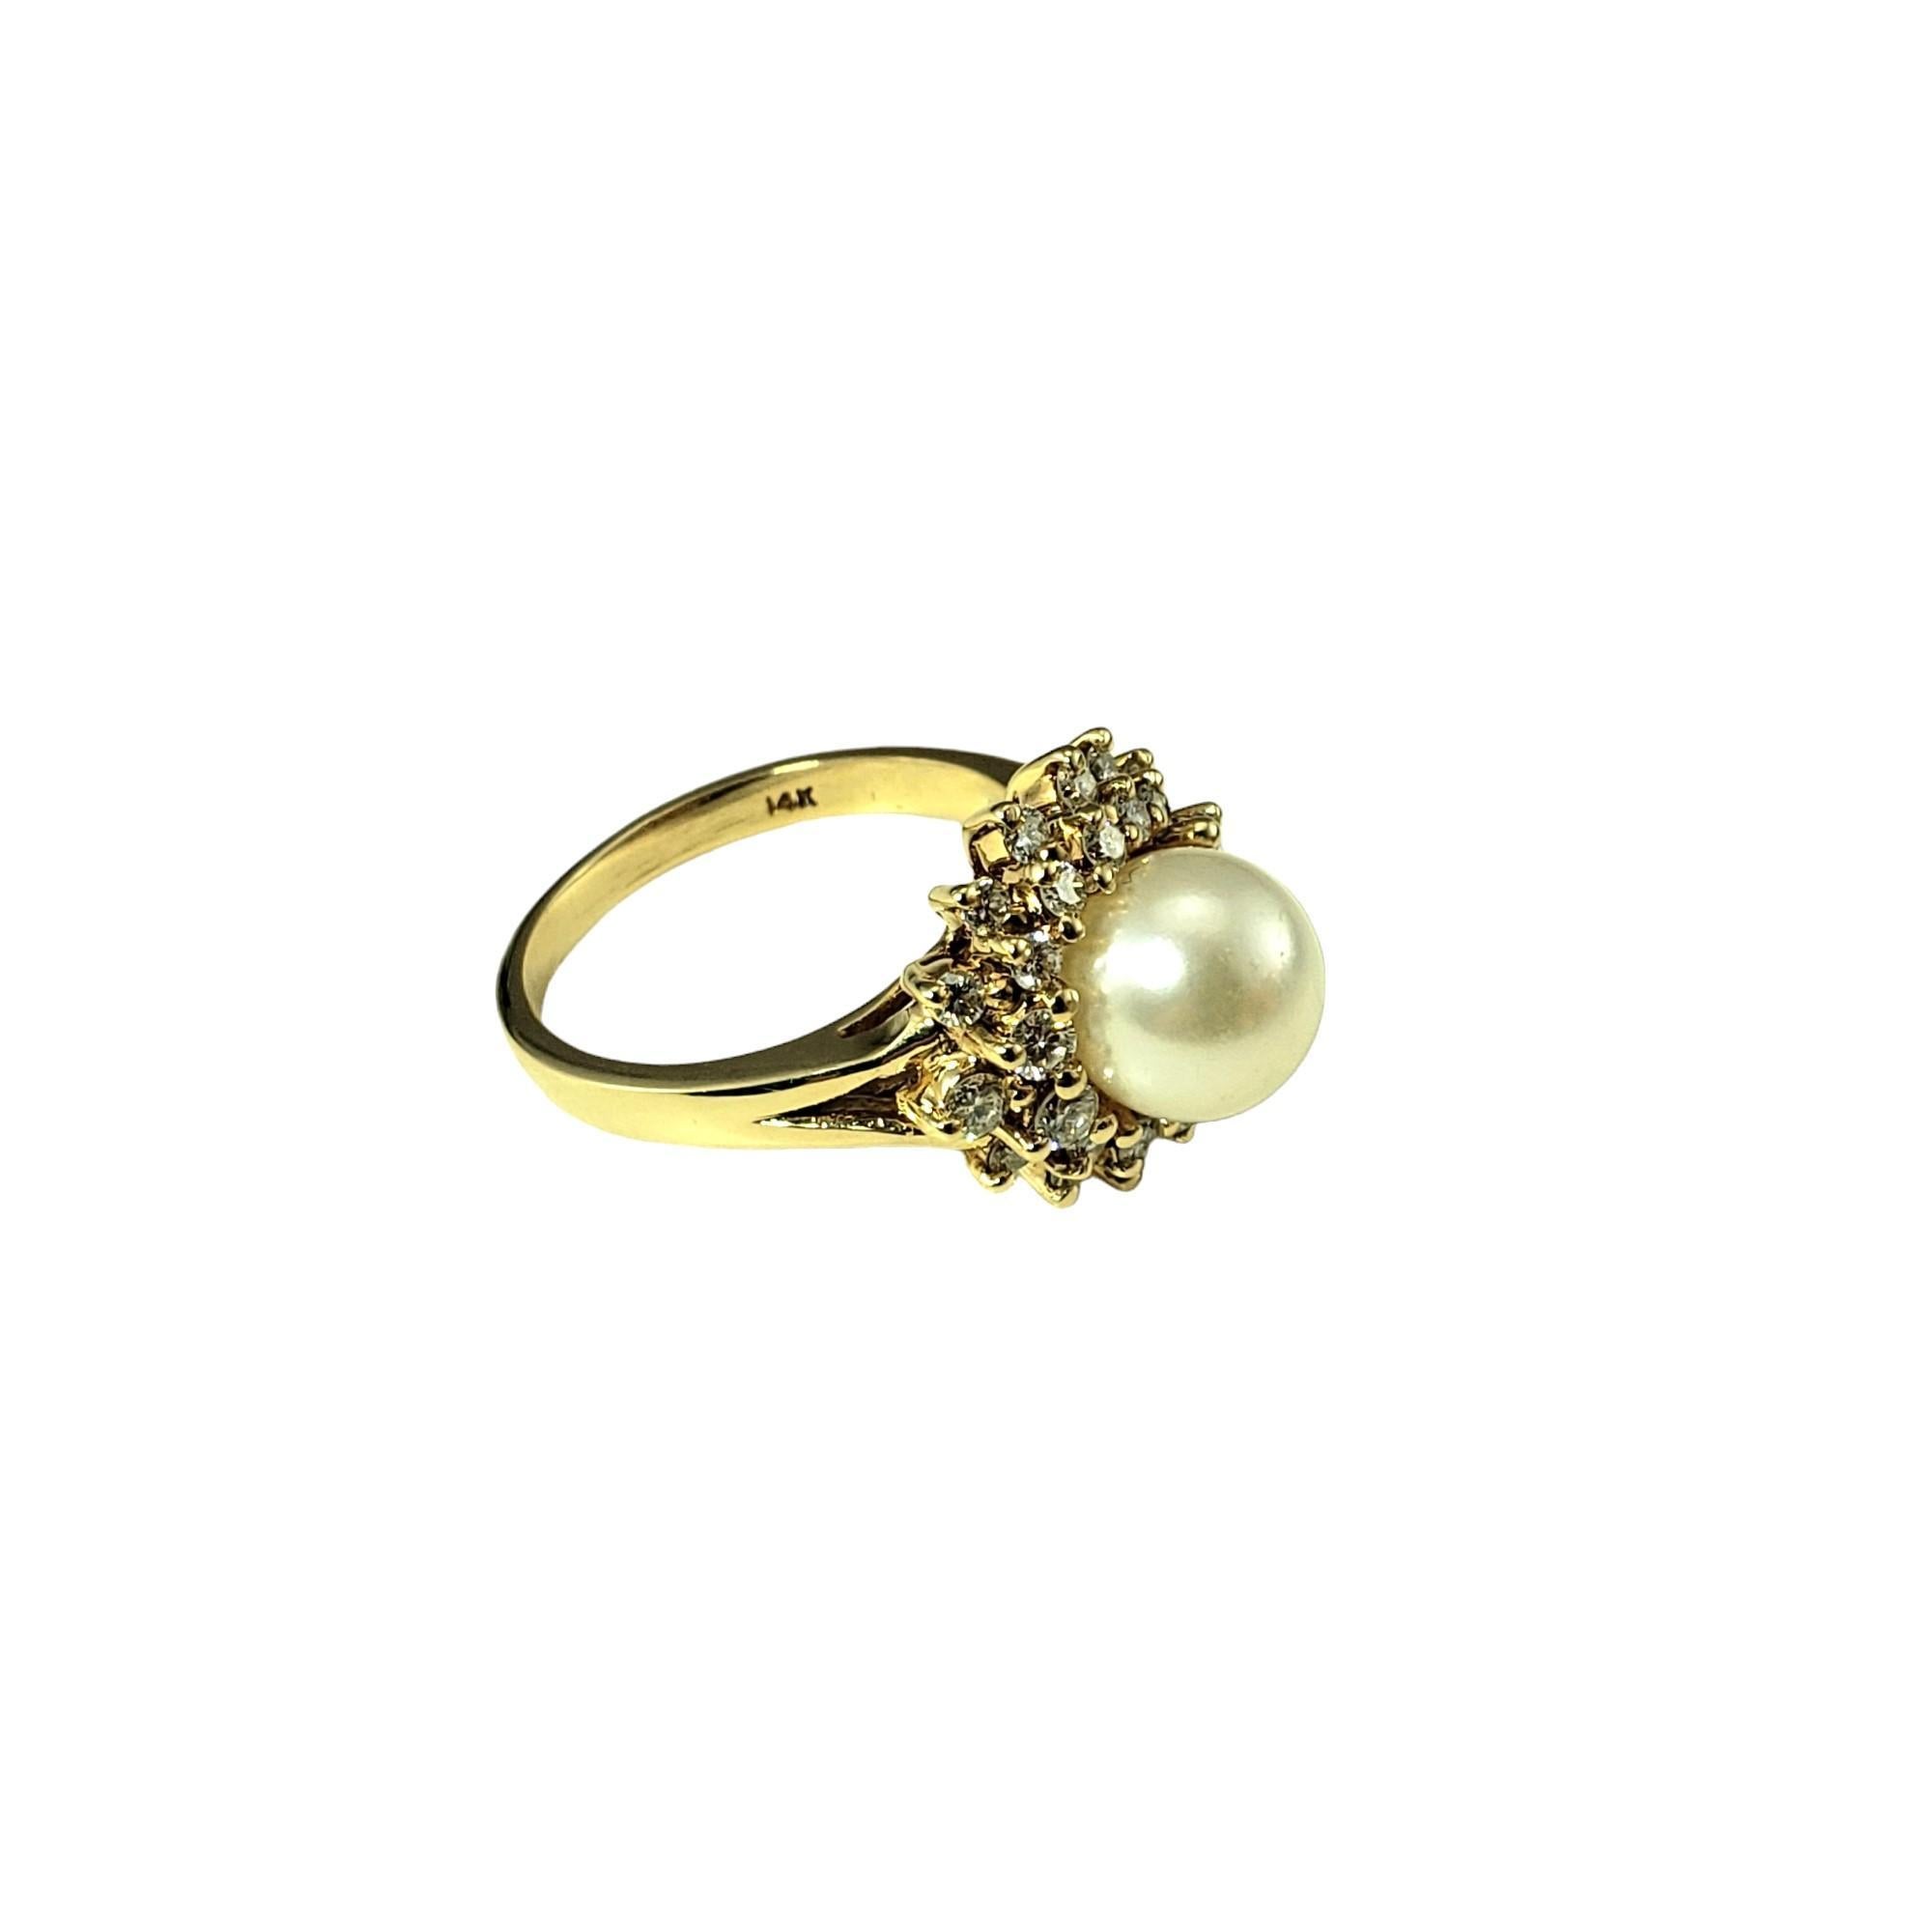 14 Karat Yellow Gold Pearl and Diamond Ring Size 7.5 #16651 In Good Condition For Sale In Washington Depot, CT